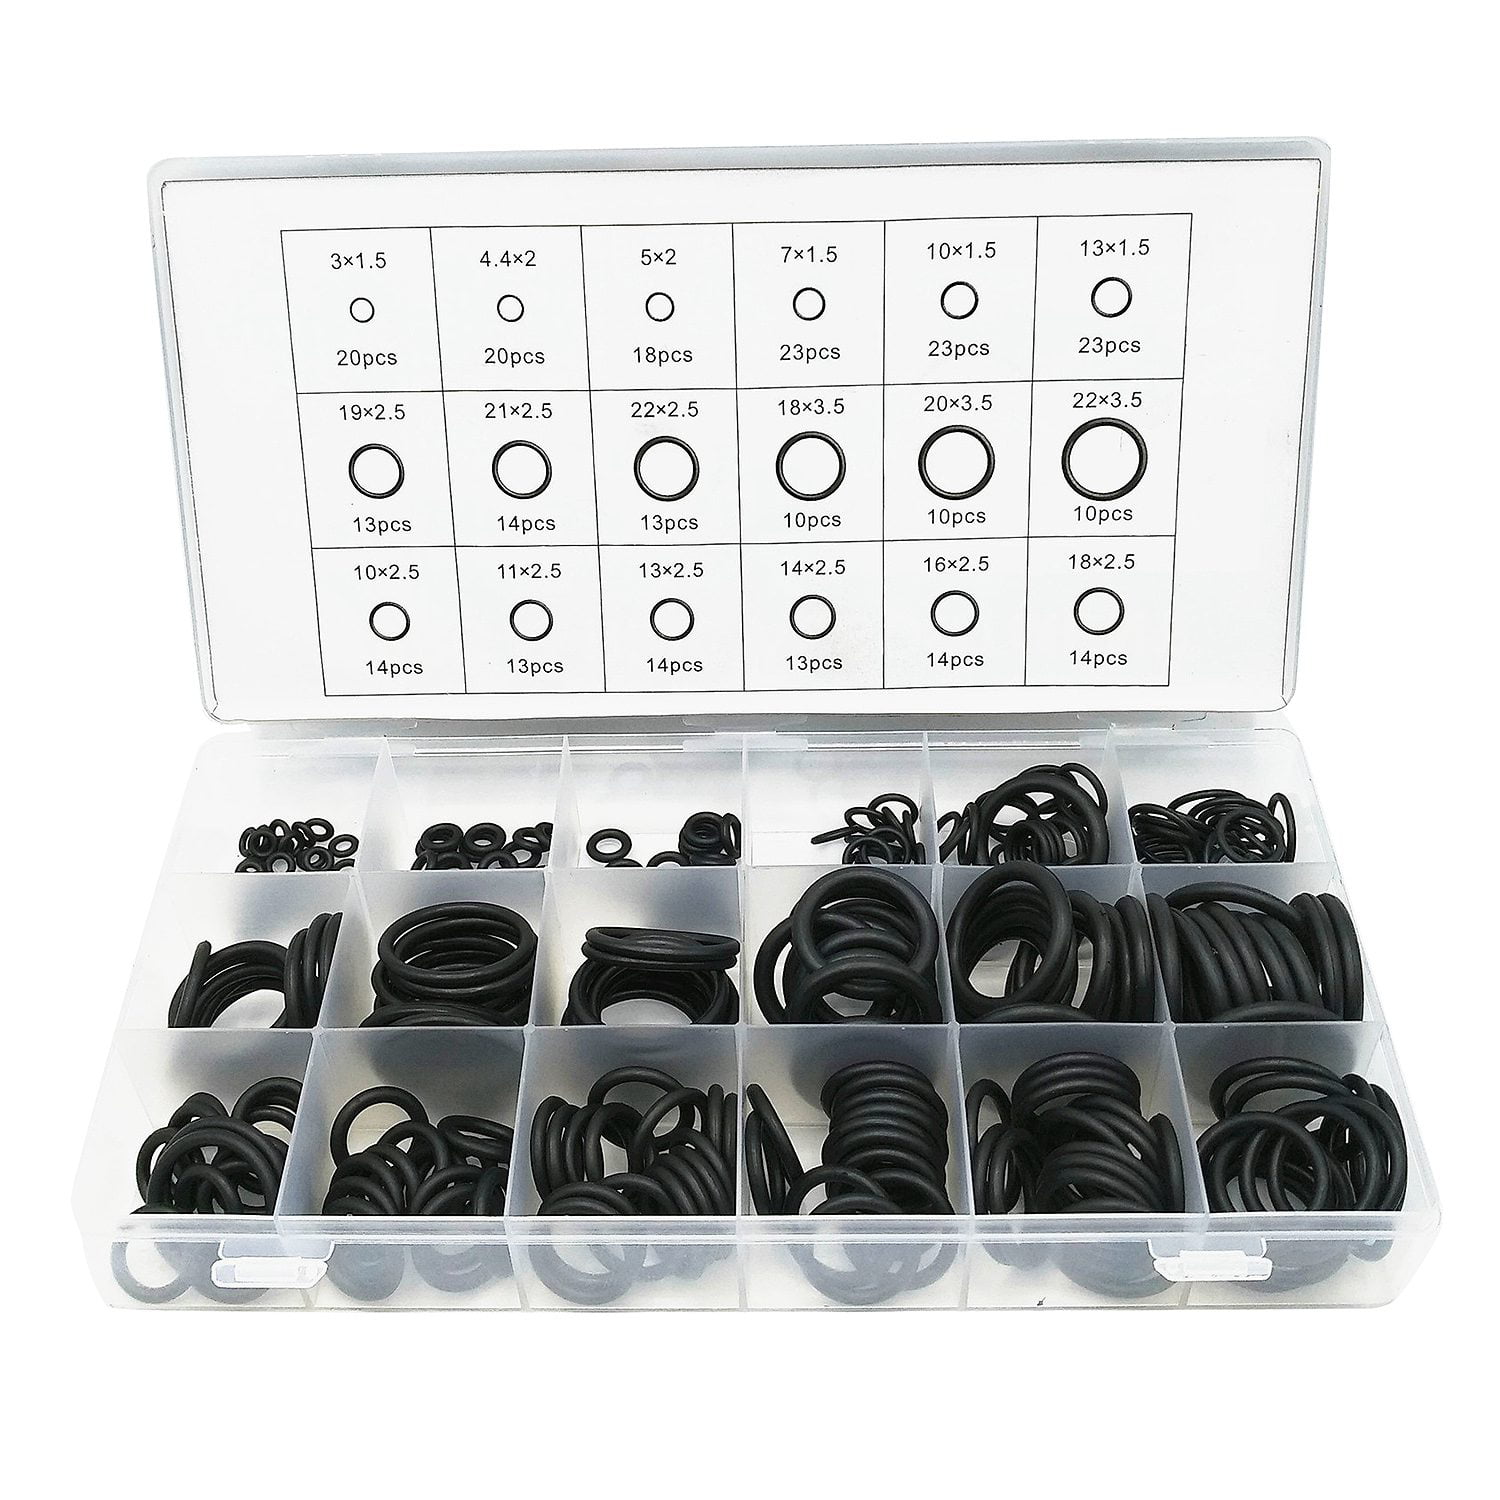 Silicone O-rings 20 x 3.5mm Price for 5 pcs 